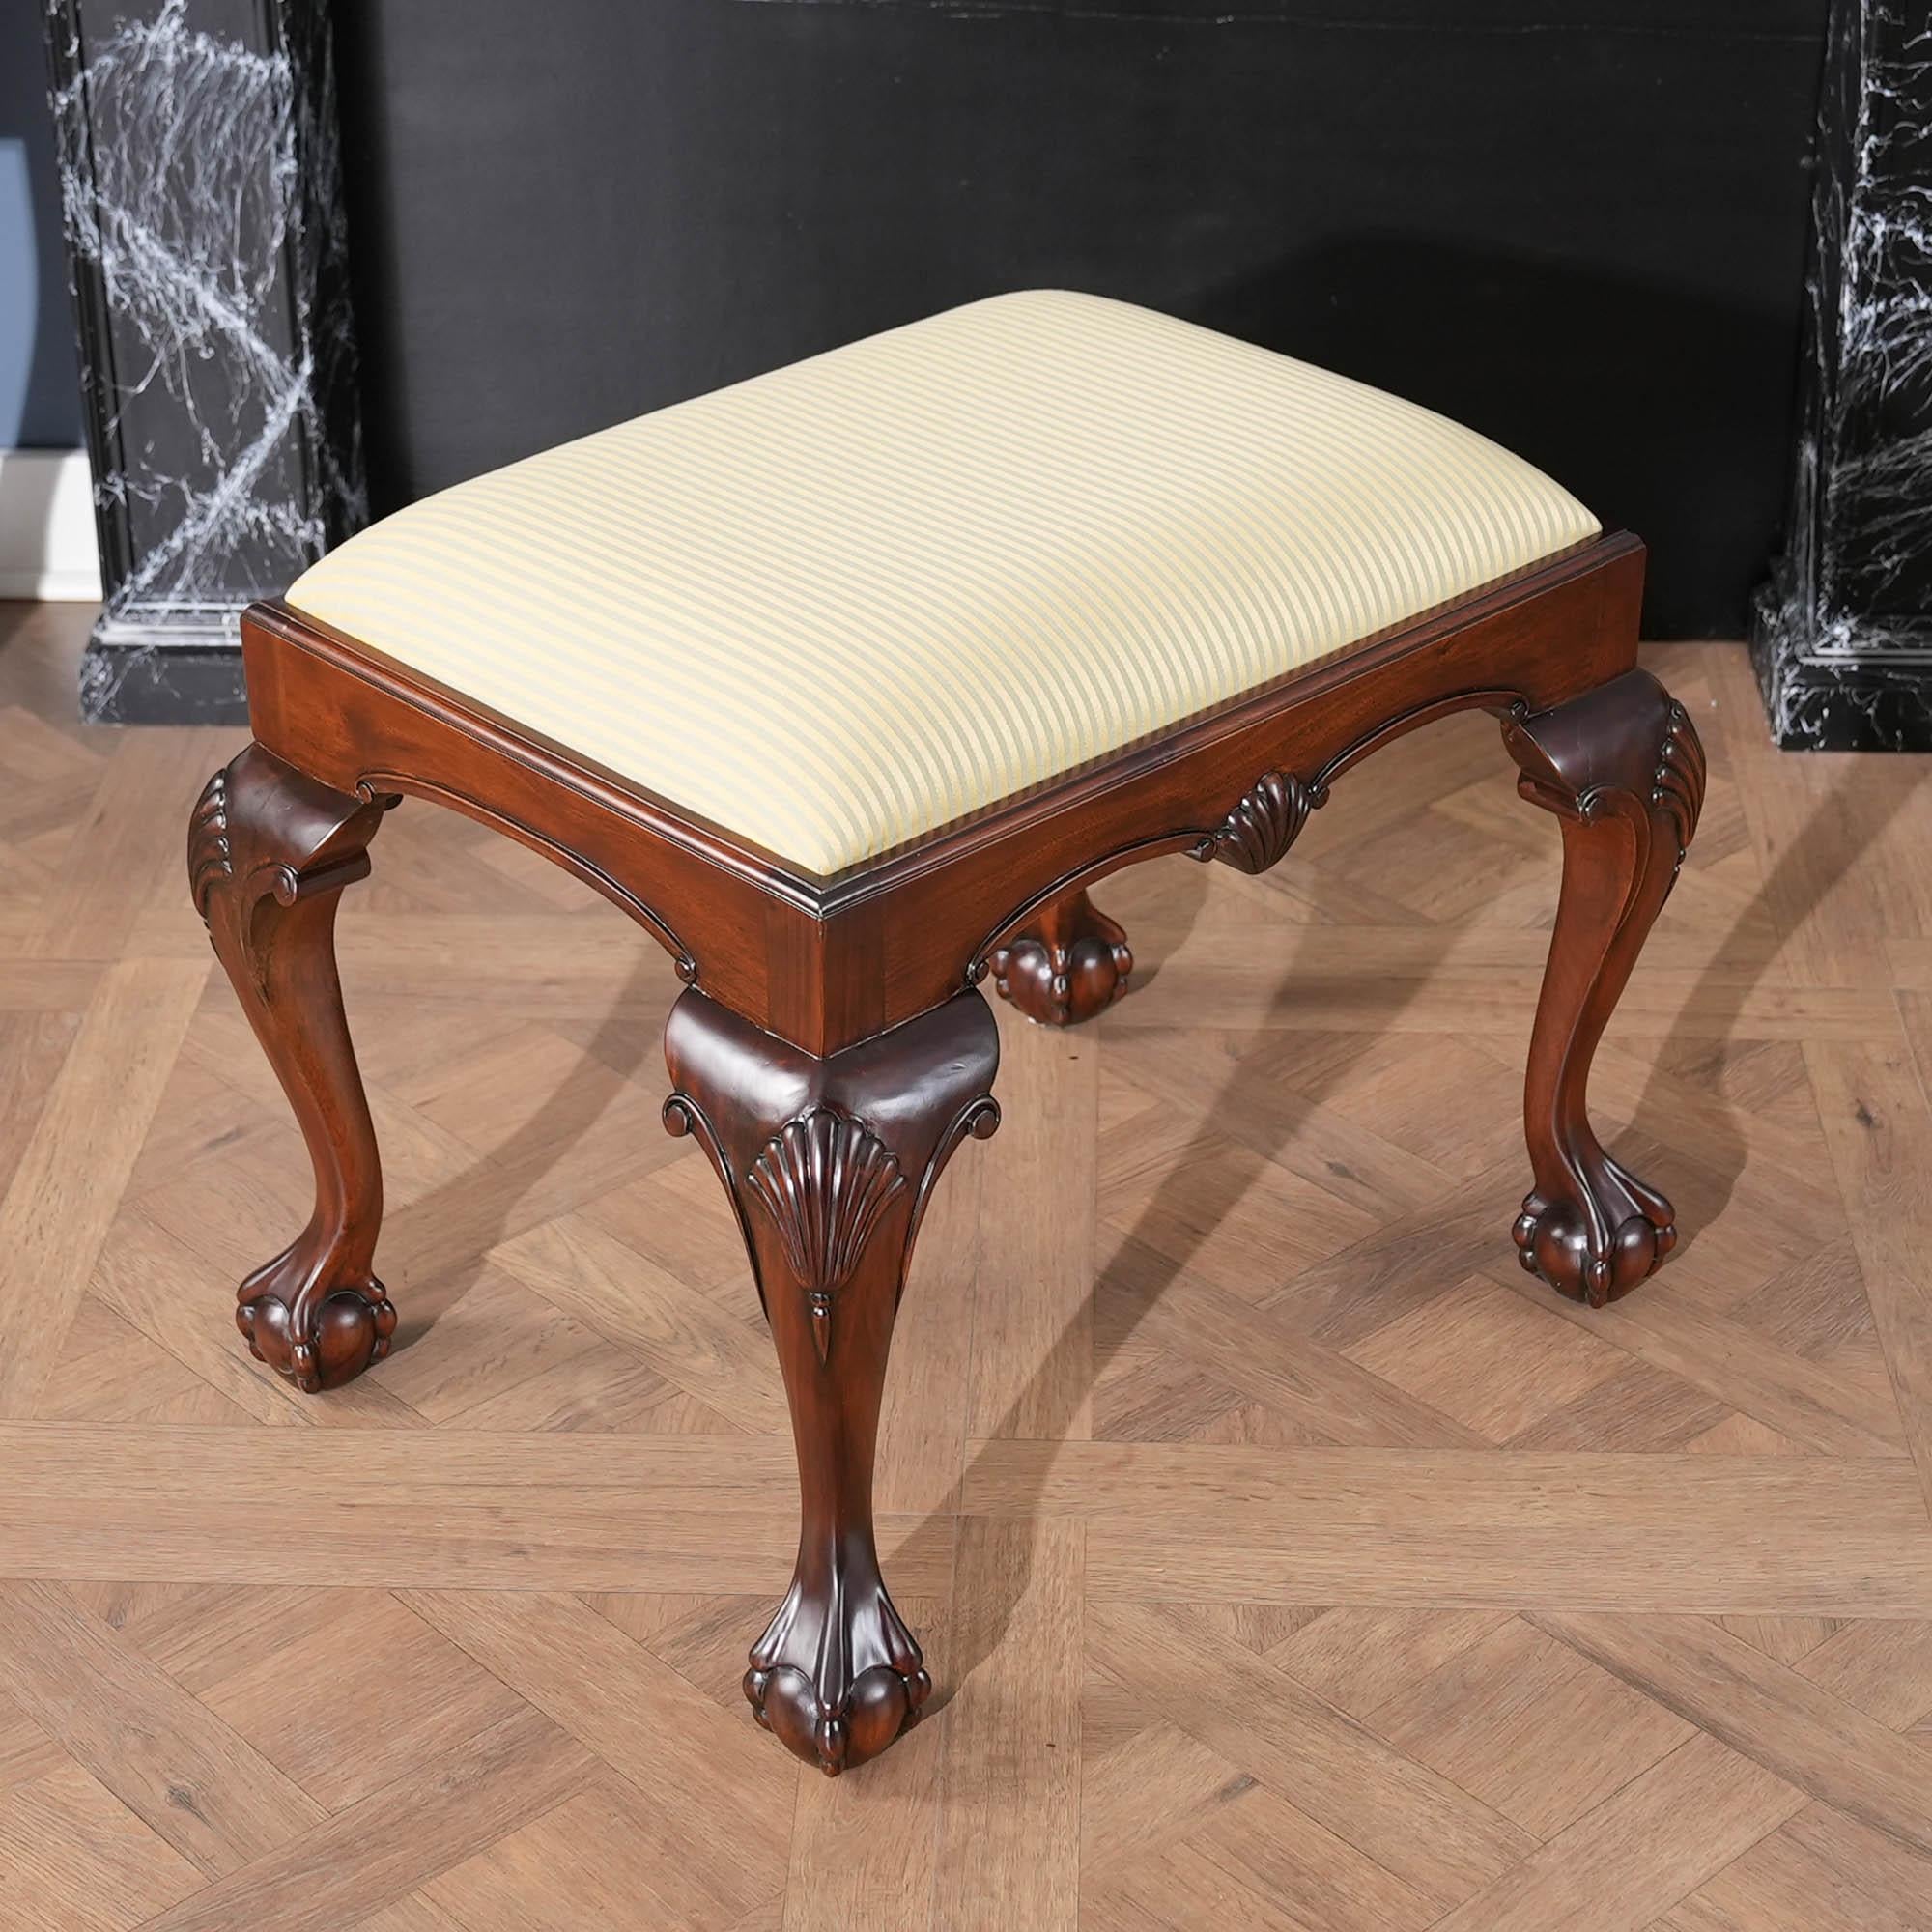 The Small Chippendale Bench is a hand carved,  Chippendale style bench carved from solid, kiln dried, plantation grown, mahogany and features an upholstered slip seat on cabriole legs and ball and claw feet. Beautifully finished with neutral